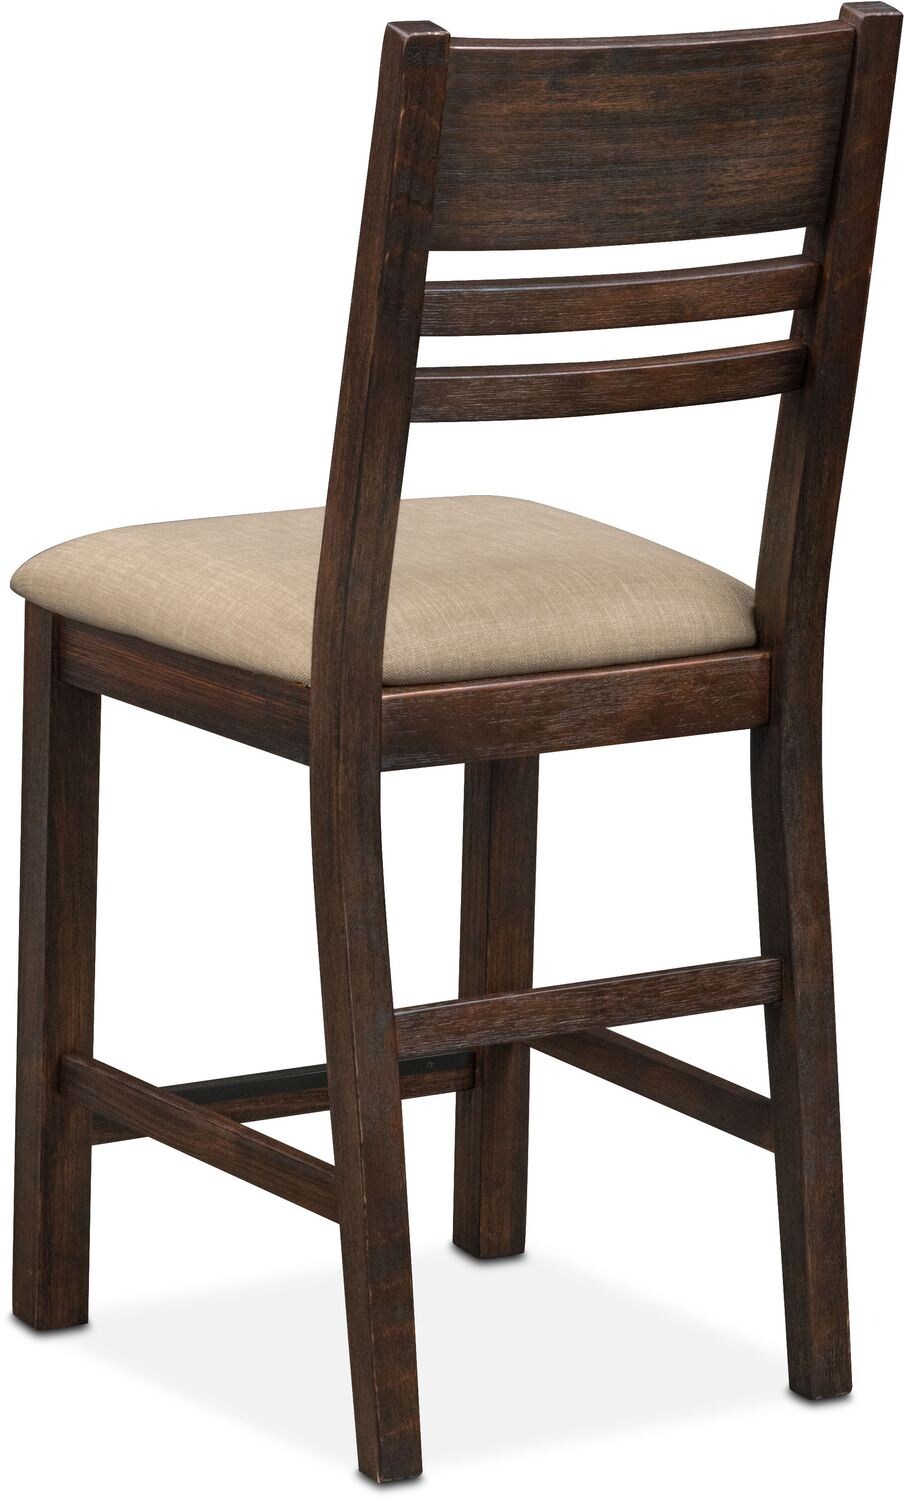 Tribeca Counter-Height Side Chair - Tobacco | Value City Furniture